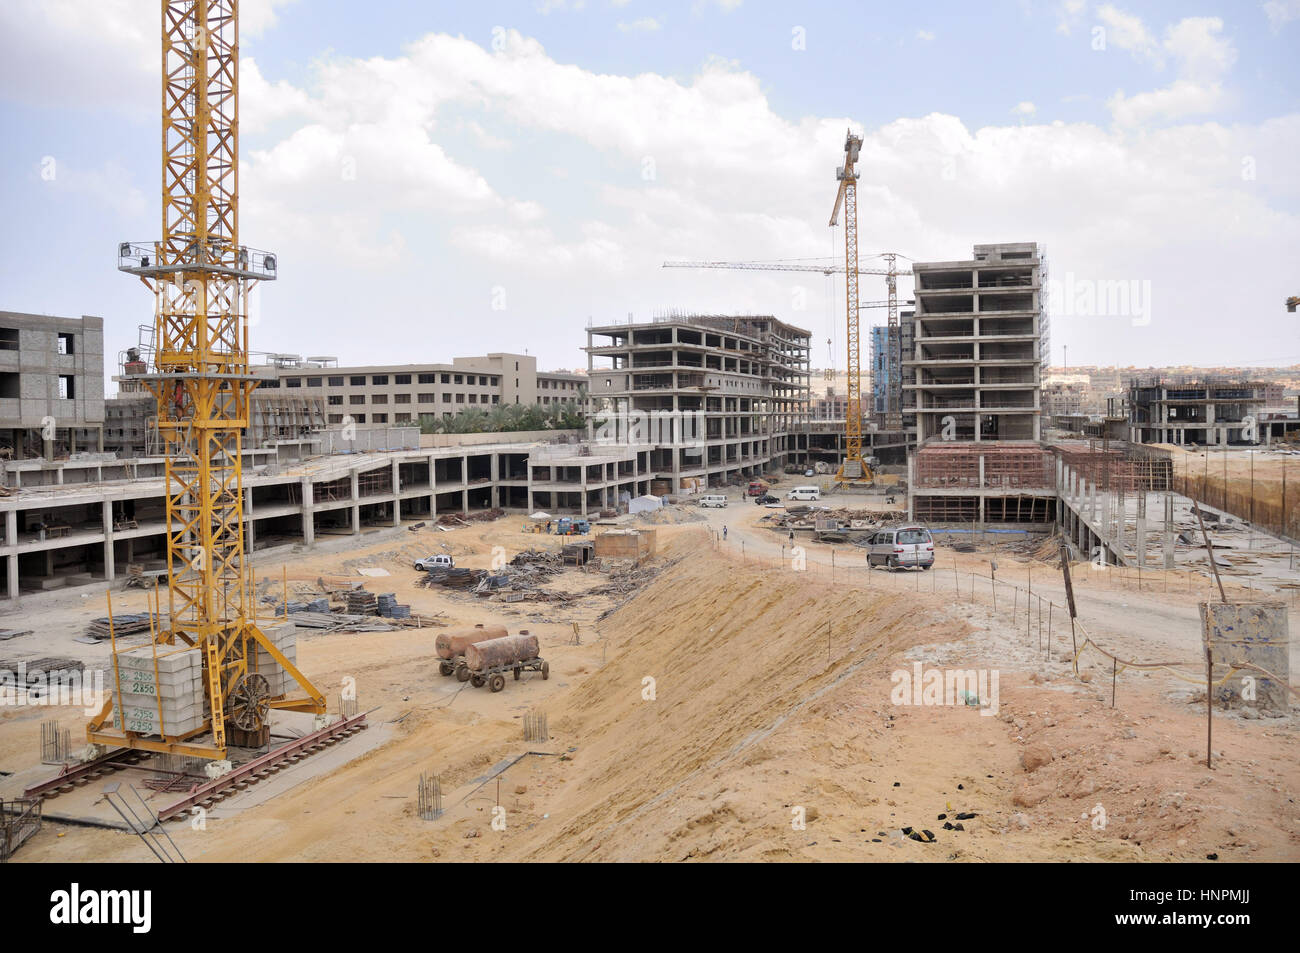 cairo-egypt-new-building-and-office-construction-in-the-6th-of-october-HNPMJJ.jpg